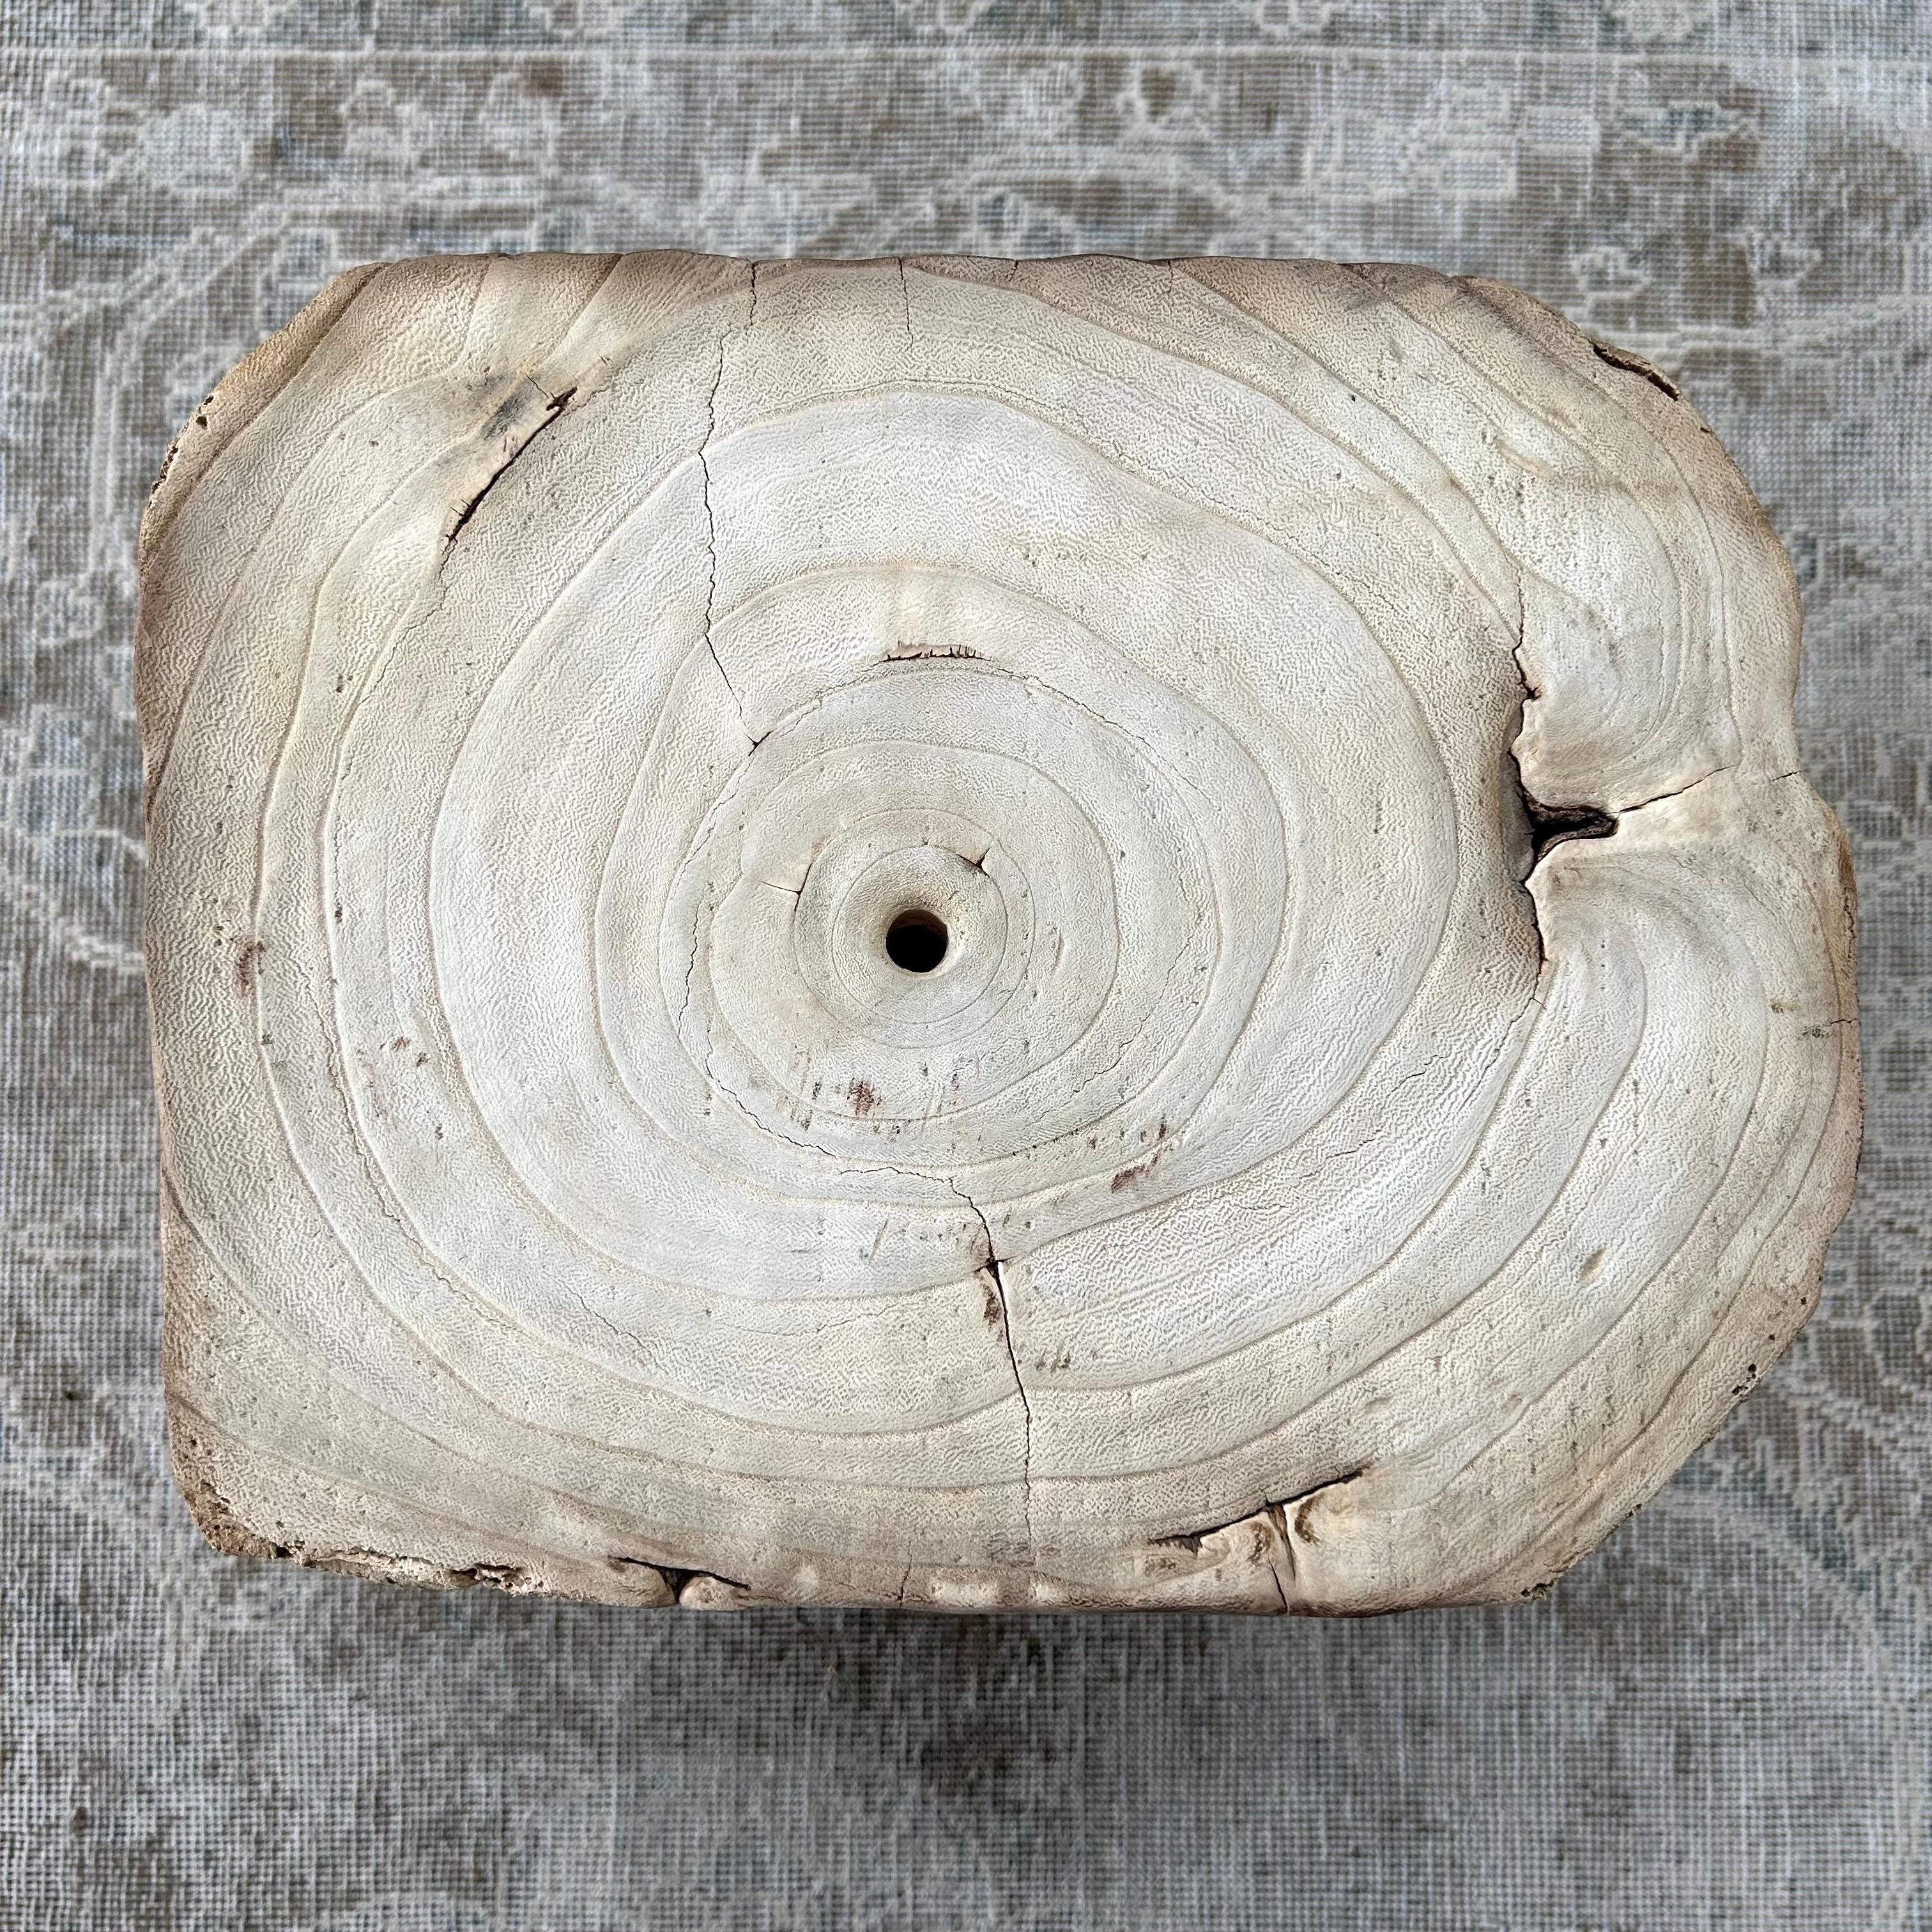 Natural Wood Stump Side Table or Stool For Sale 1